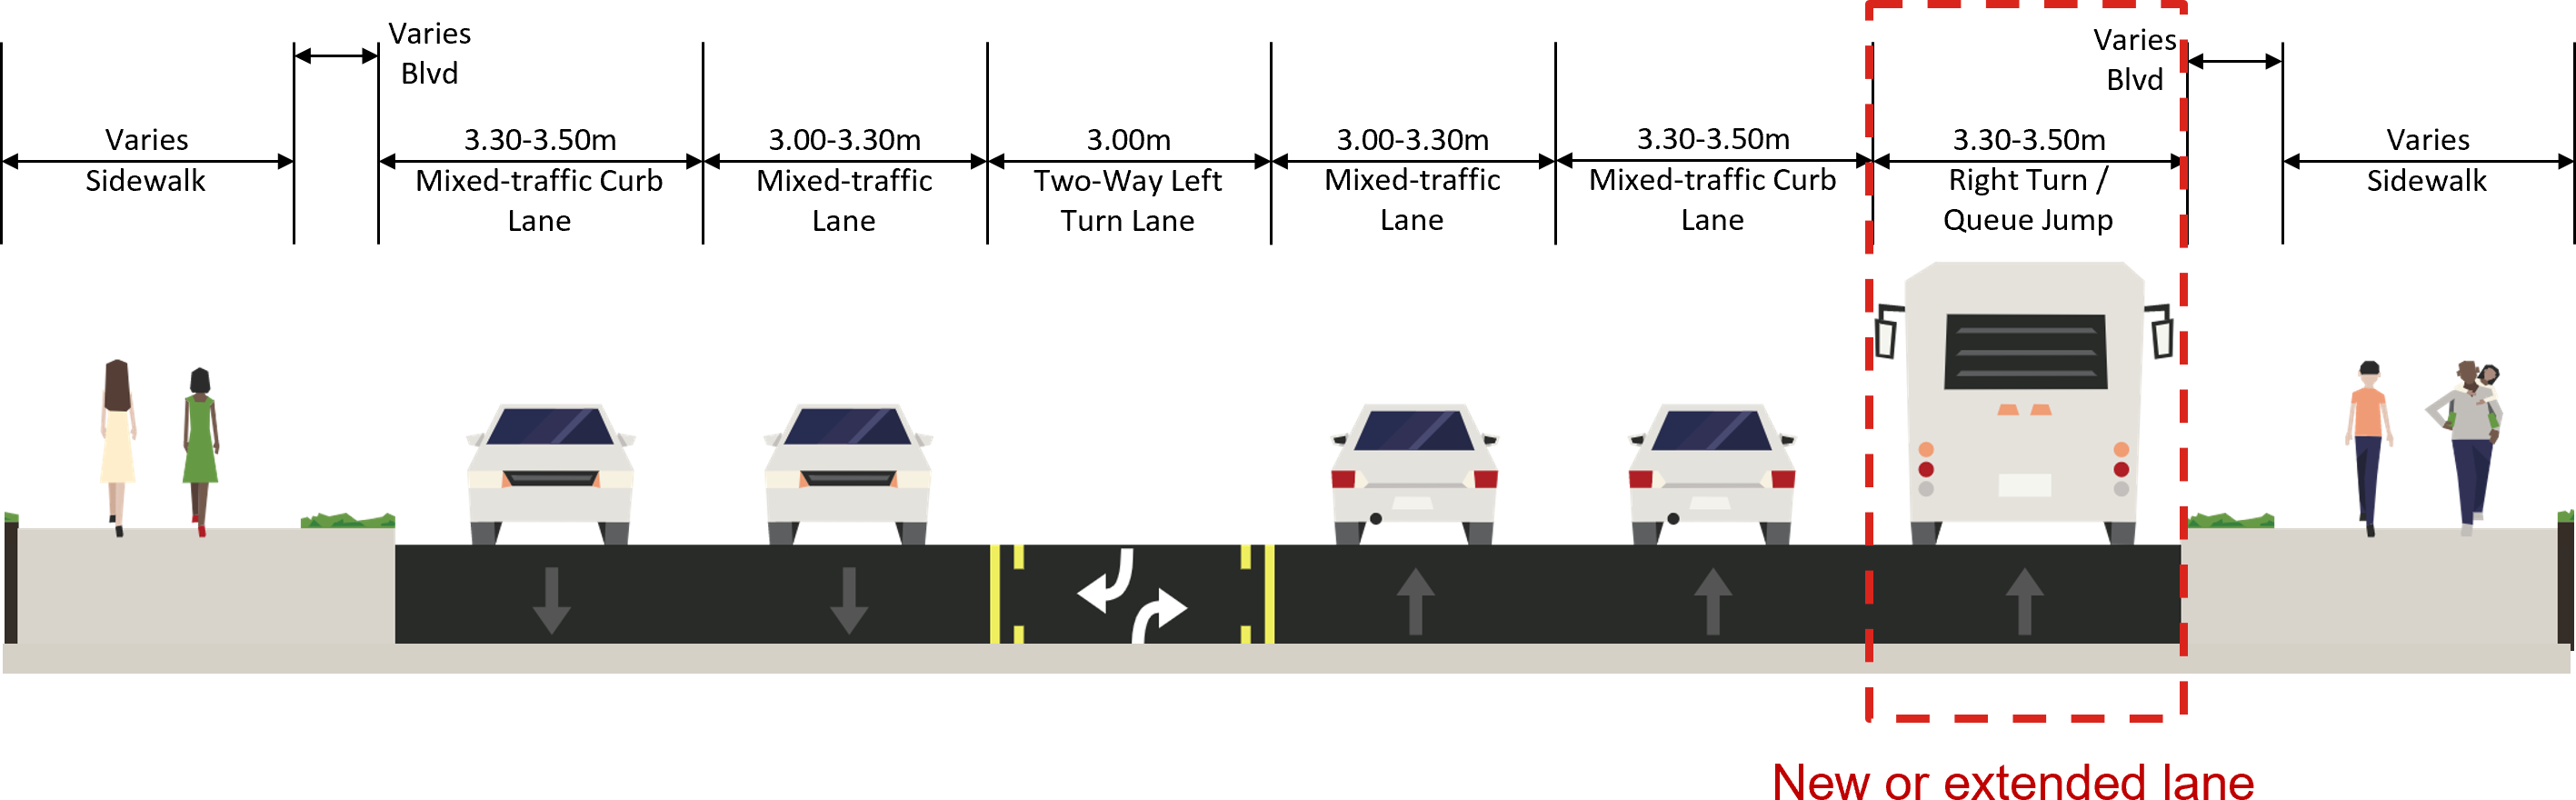 Typical cross-section for Option 5. From left to right: sidewalk, boulevard, mixed-traffic curb lane, mixed-traffic lane, two-way left turn lane, mixed-traffic lane, mixed-traffic curb lane, right turn/queue jump lane, boulevard and sidewalk.